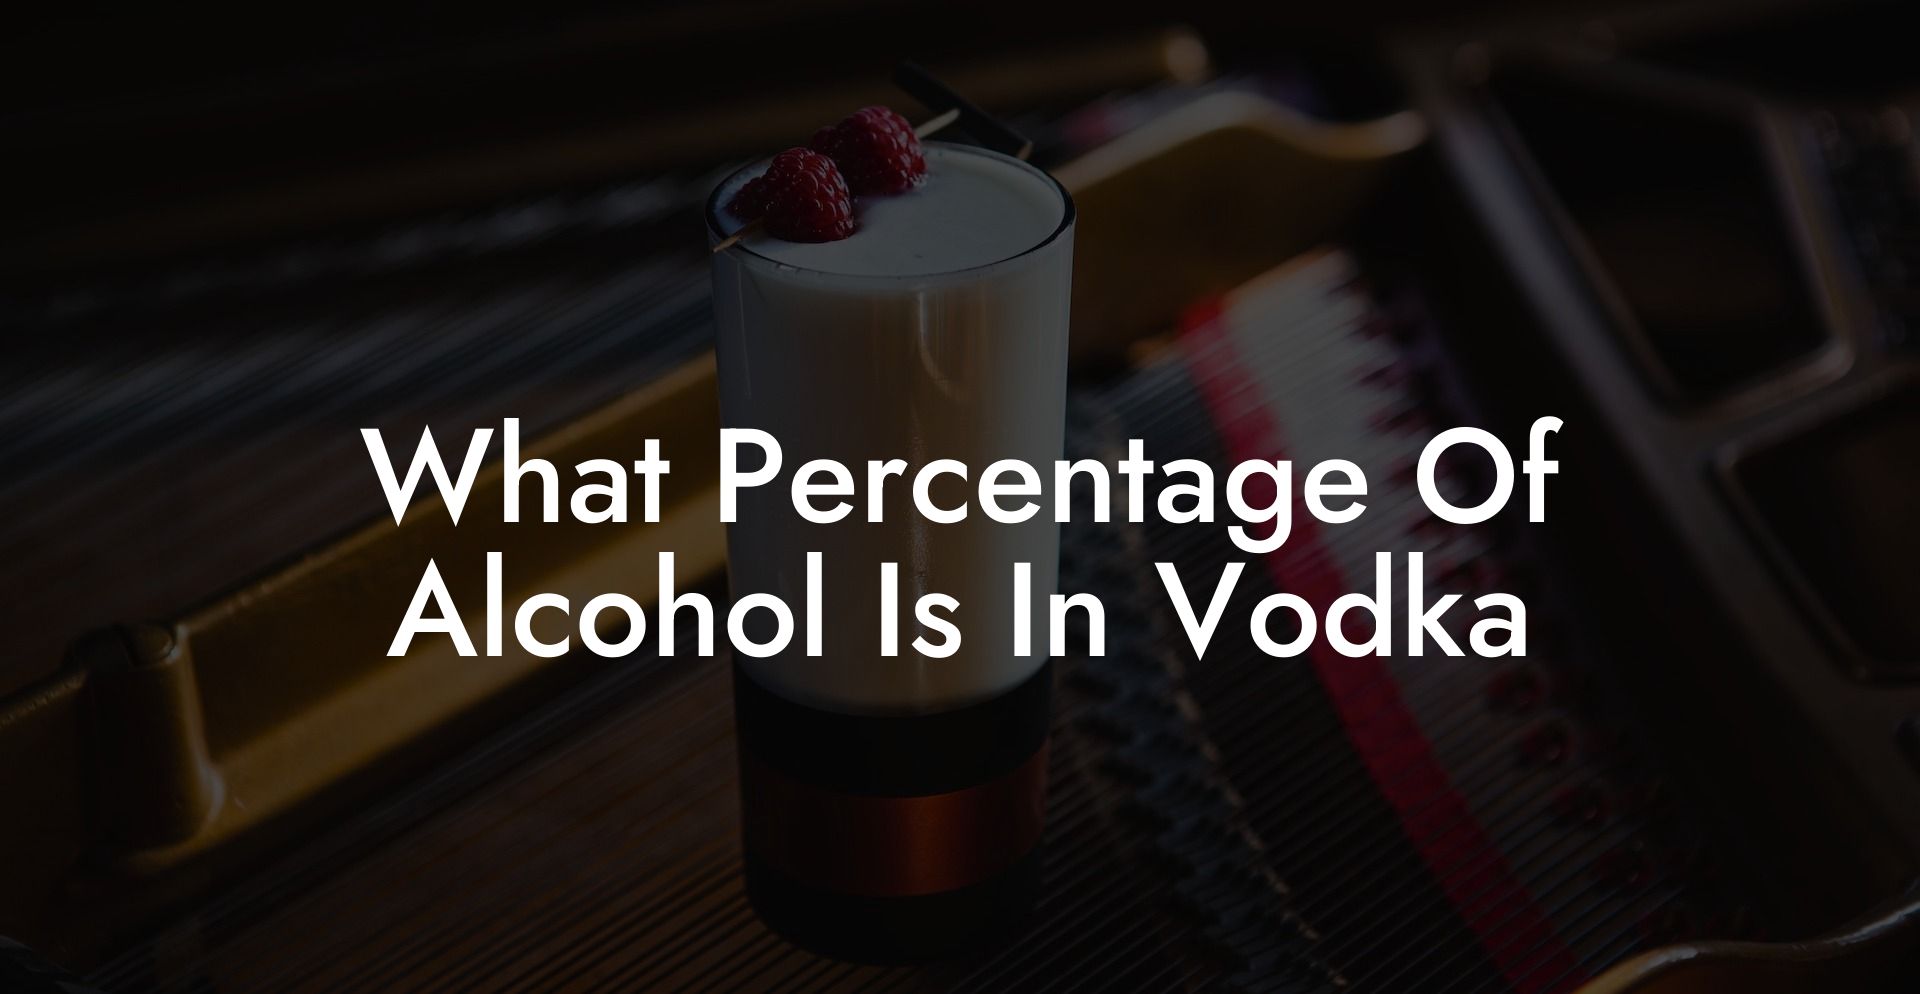 What Percentage Of Alcohol Is In Vodka